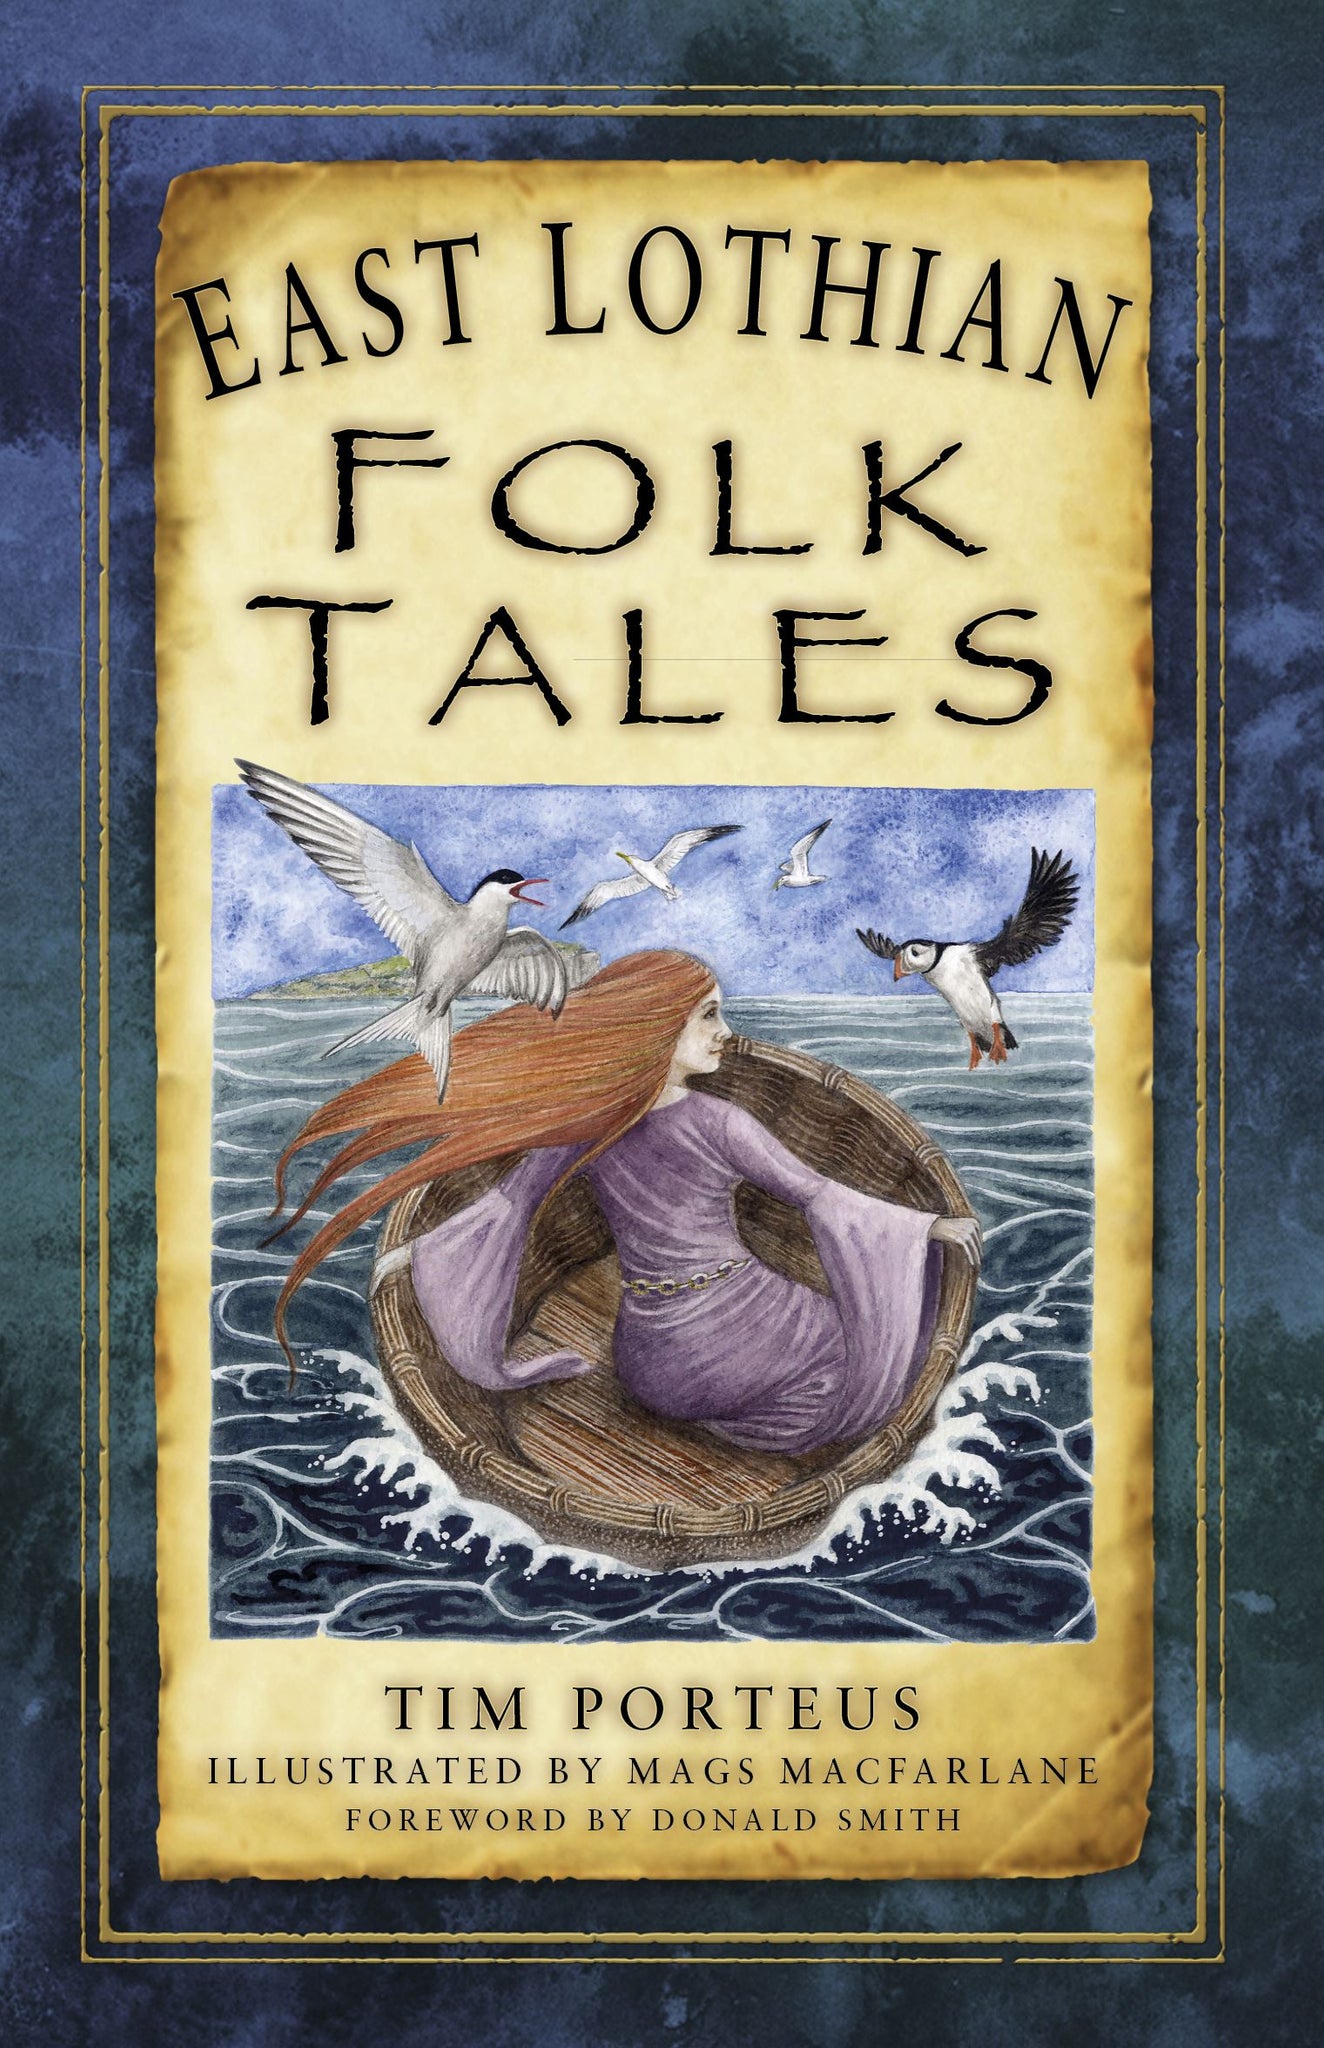 This enchanting collection of folk tales retold by a professional storyteller who writes for The East Lothian Courier 